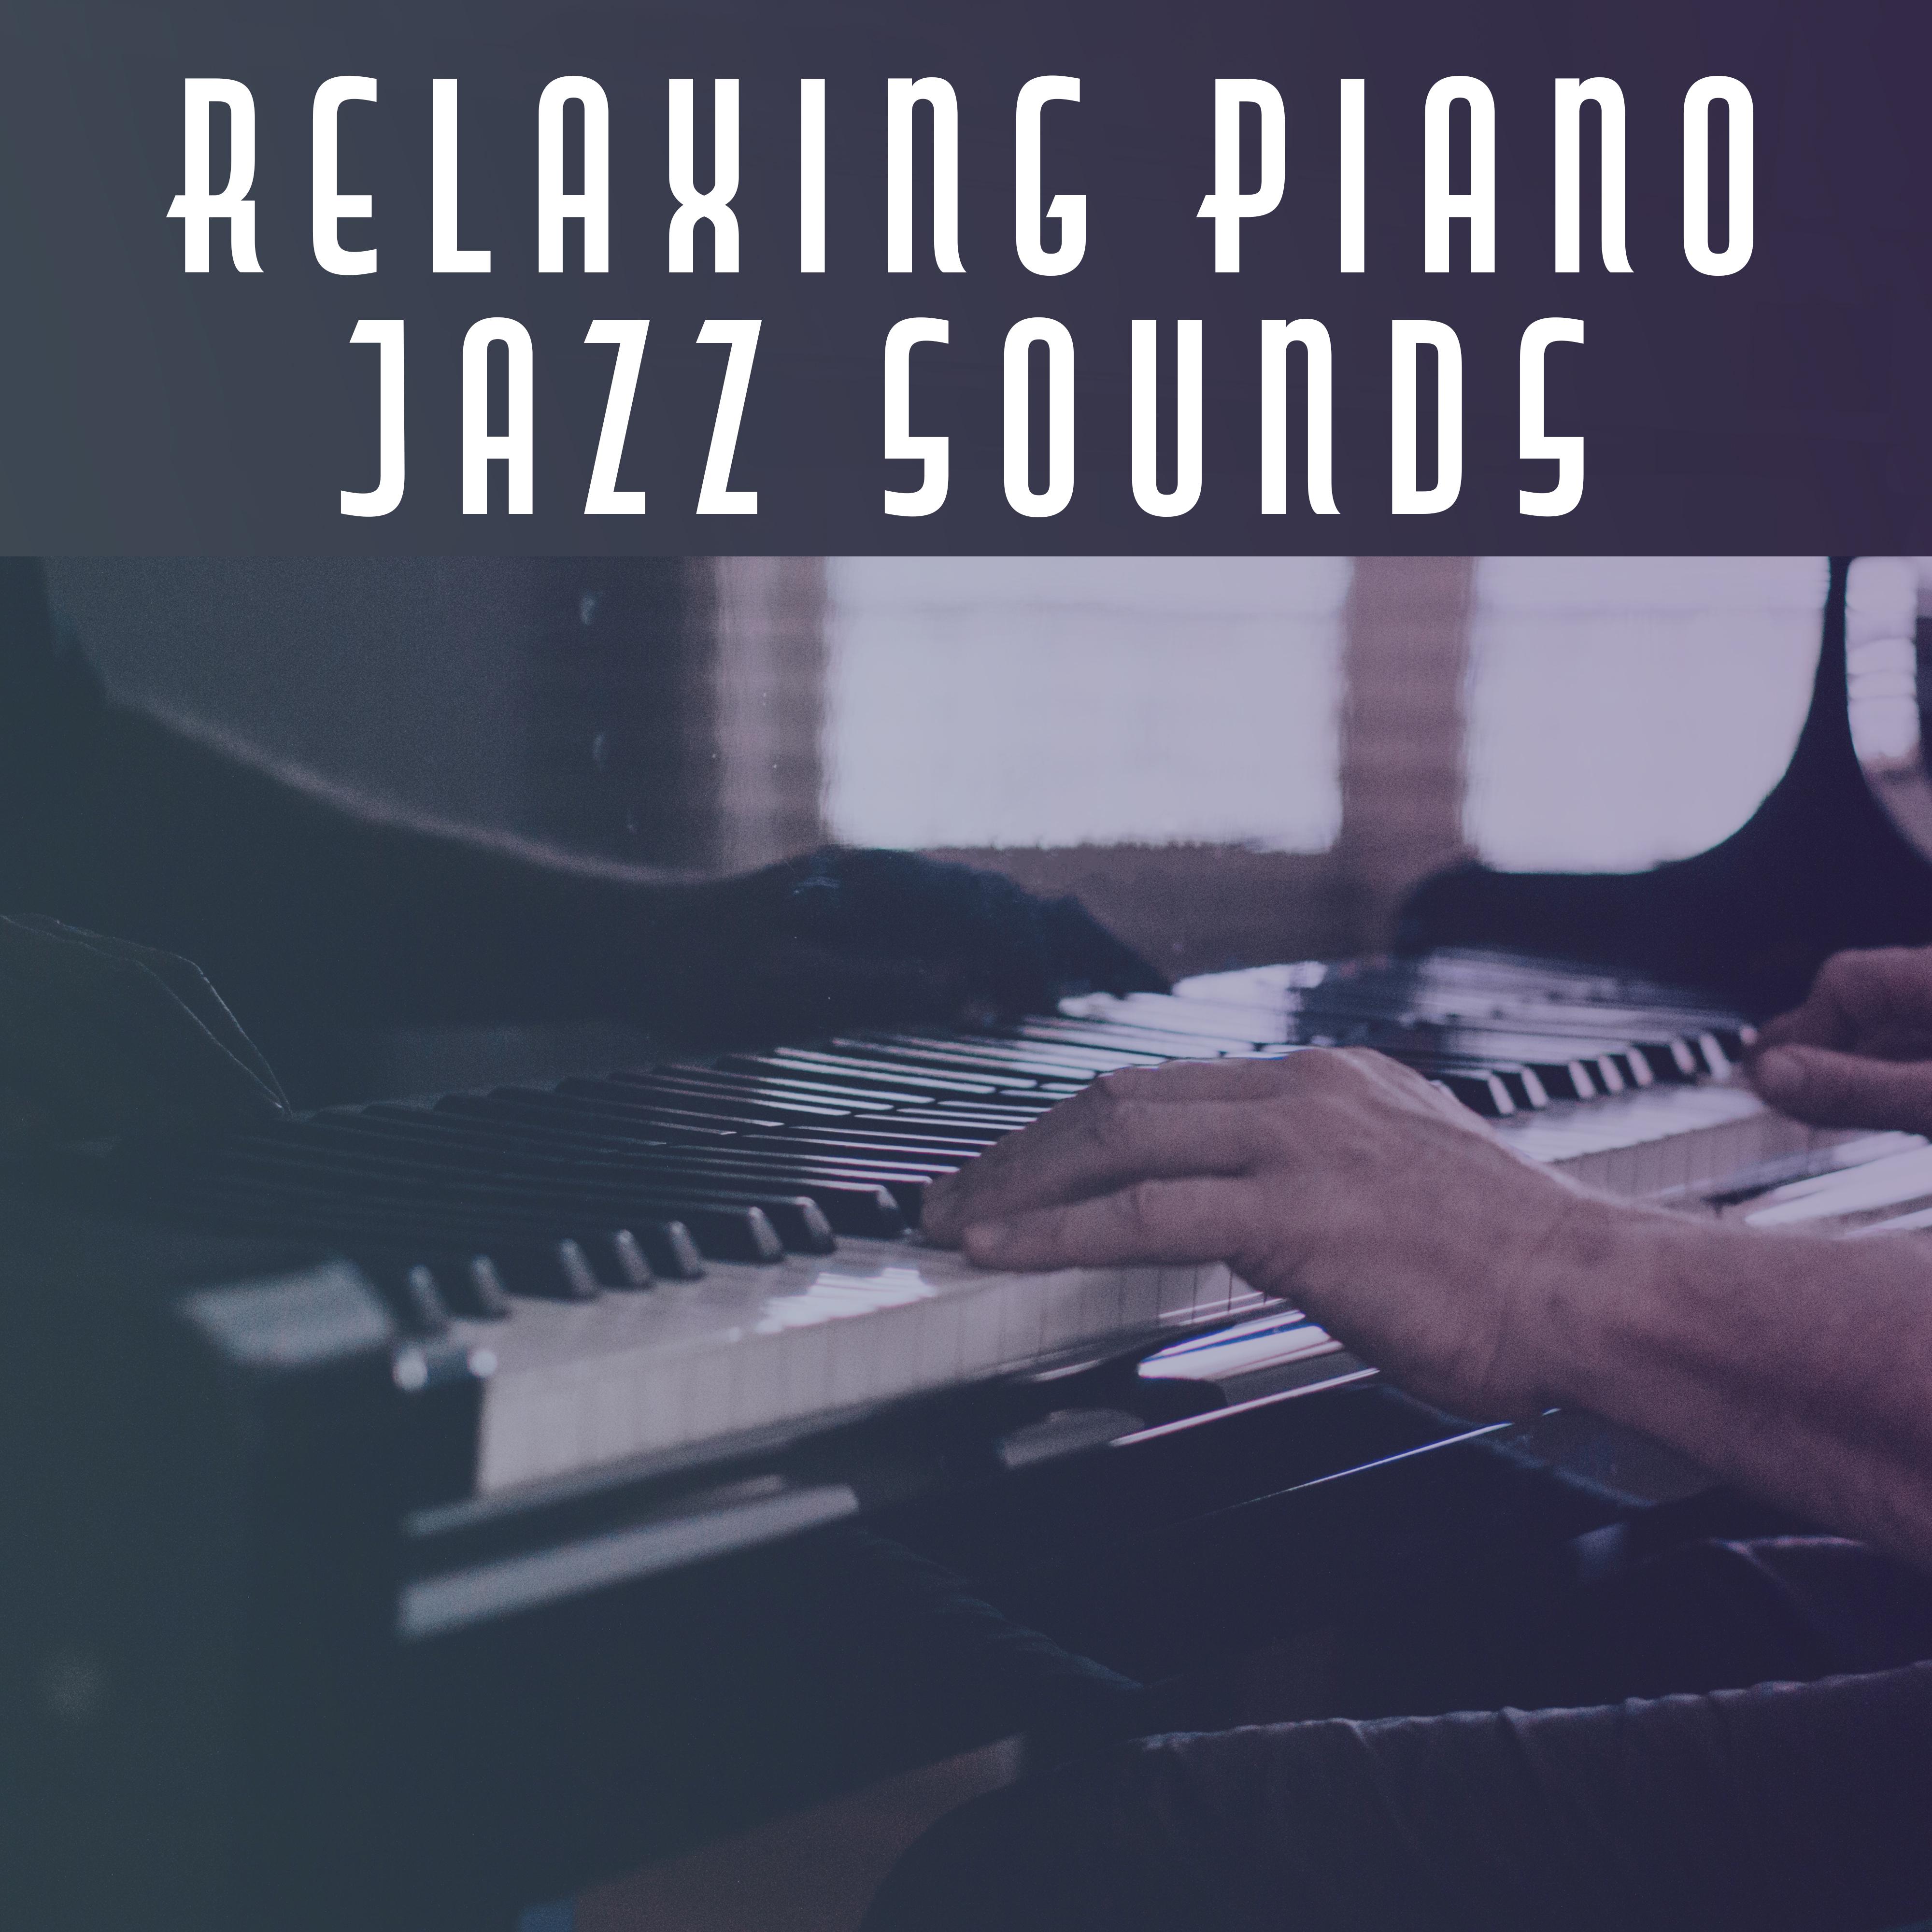 Relaxing Piano Jazz Sounds  Calming Jazz to Relax, Rest with Piano Bar, Soothing Sounds, Peaceful Note